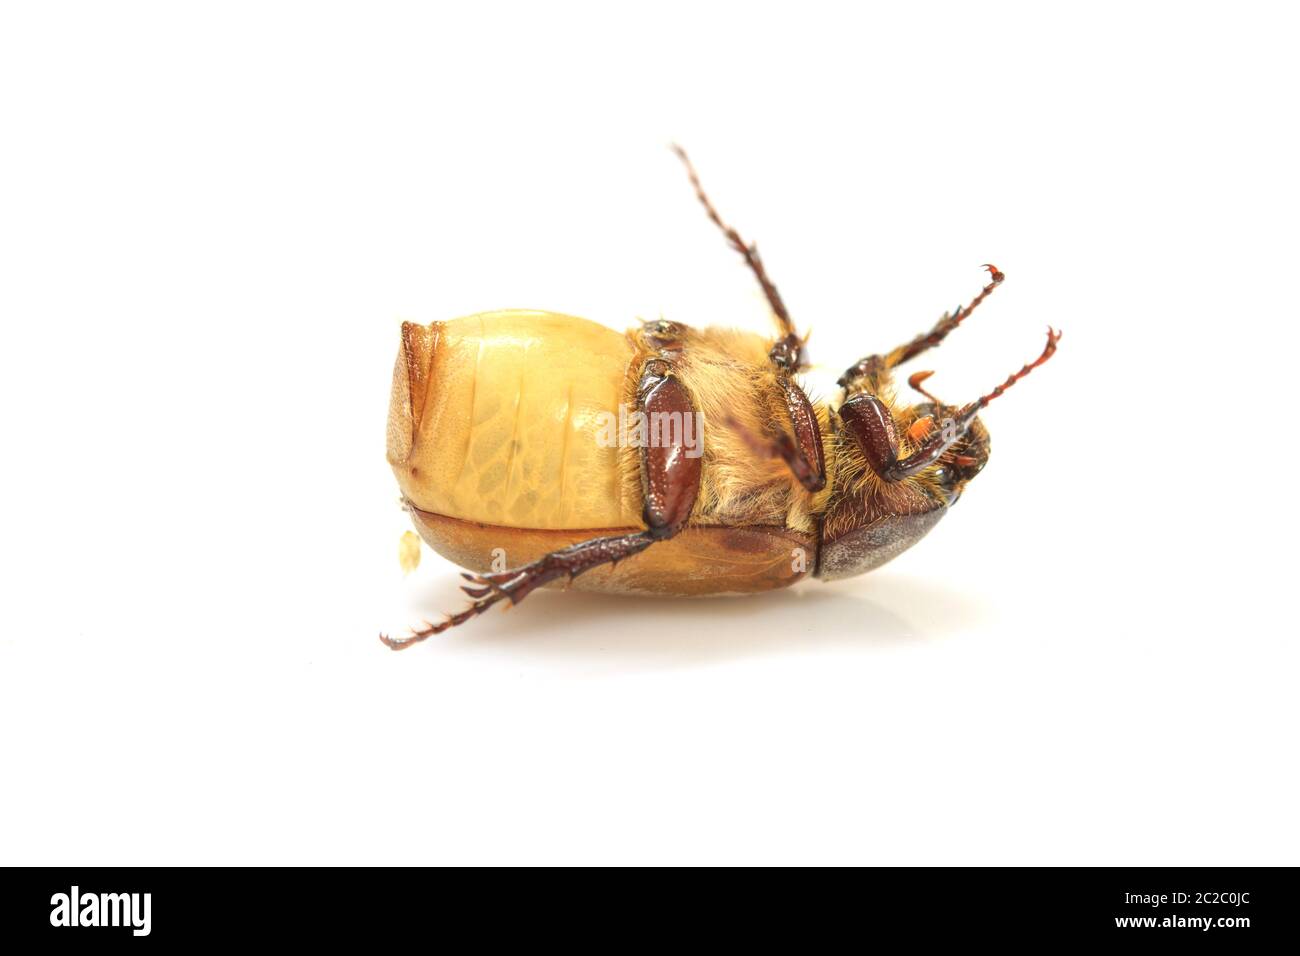 Cockchafer or  May bug on white background Stock Photo